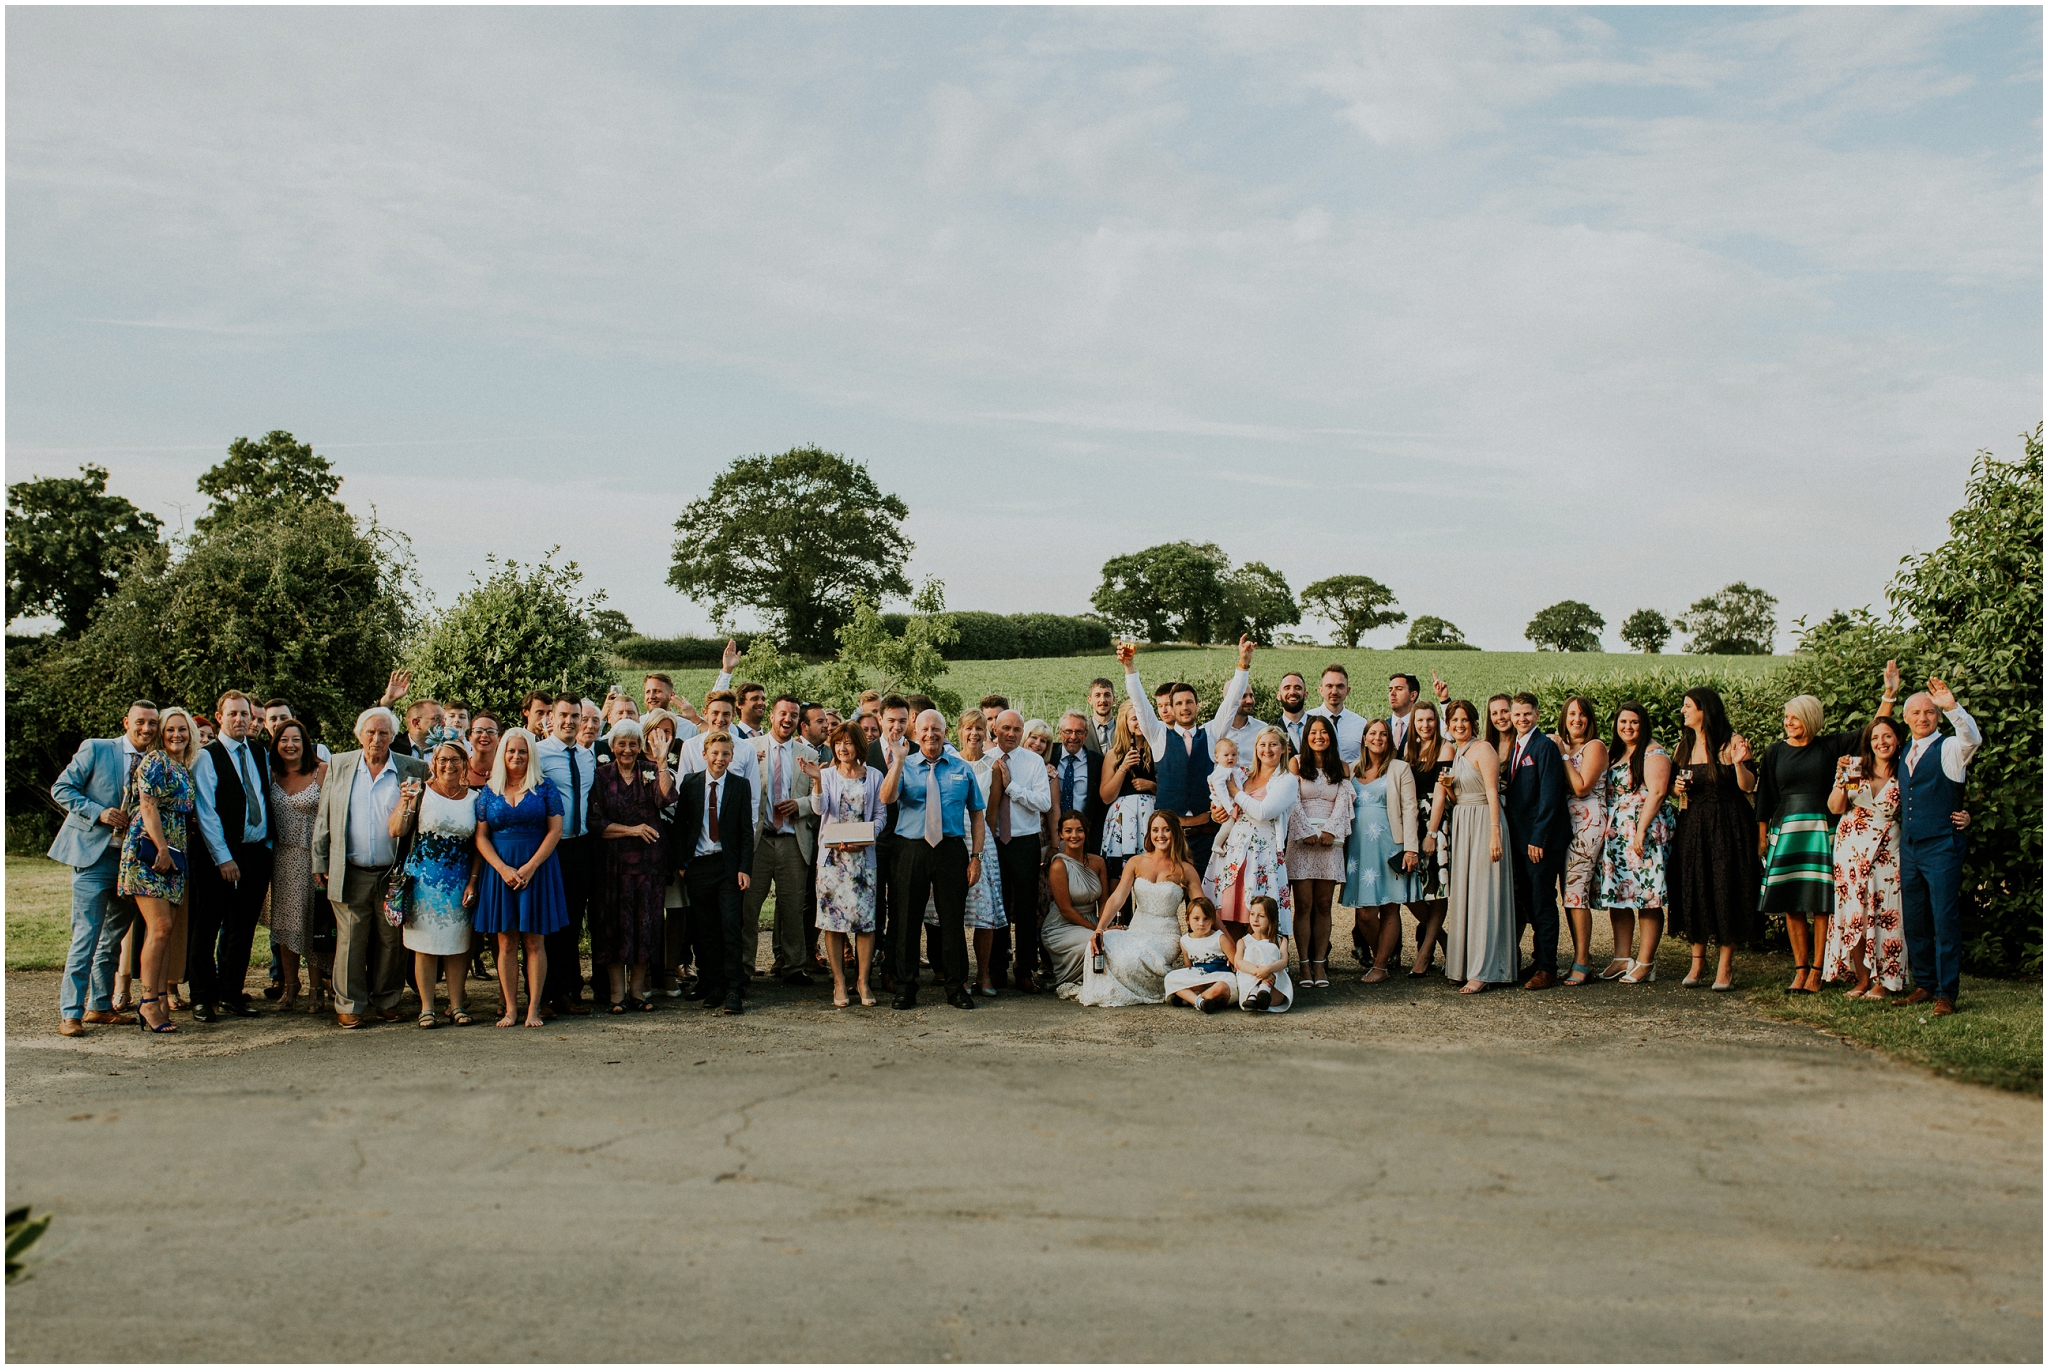 group photo of everyone at the wedding